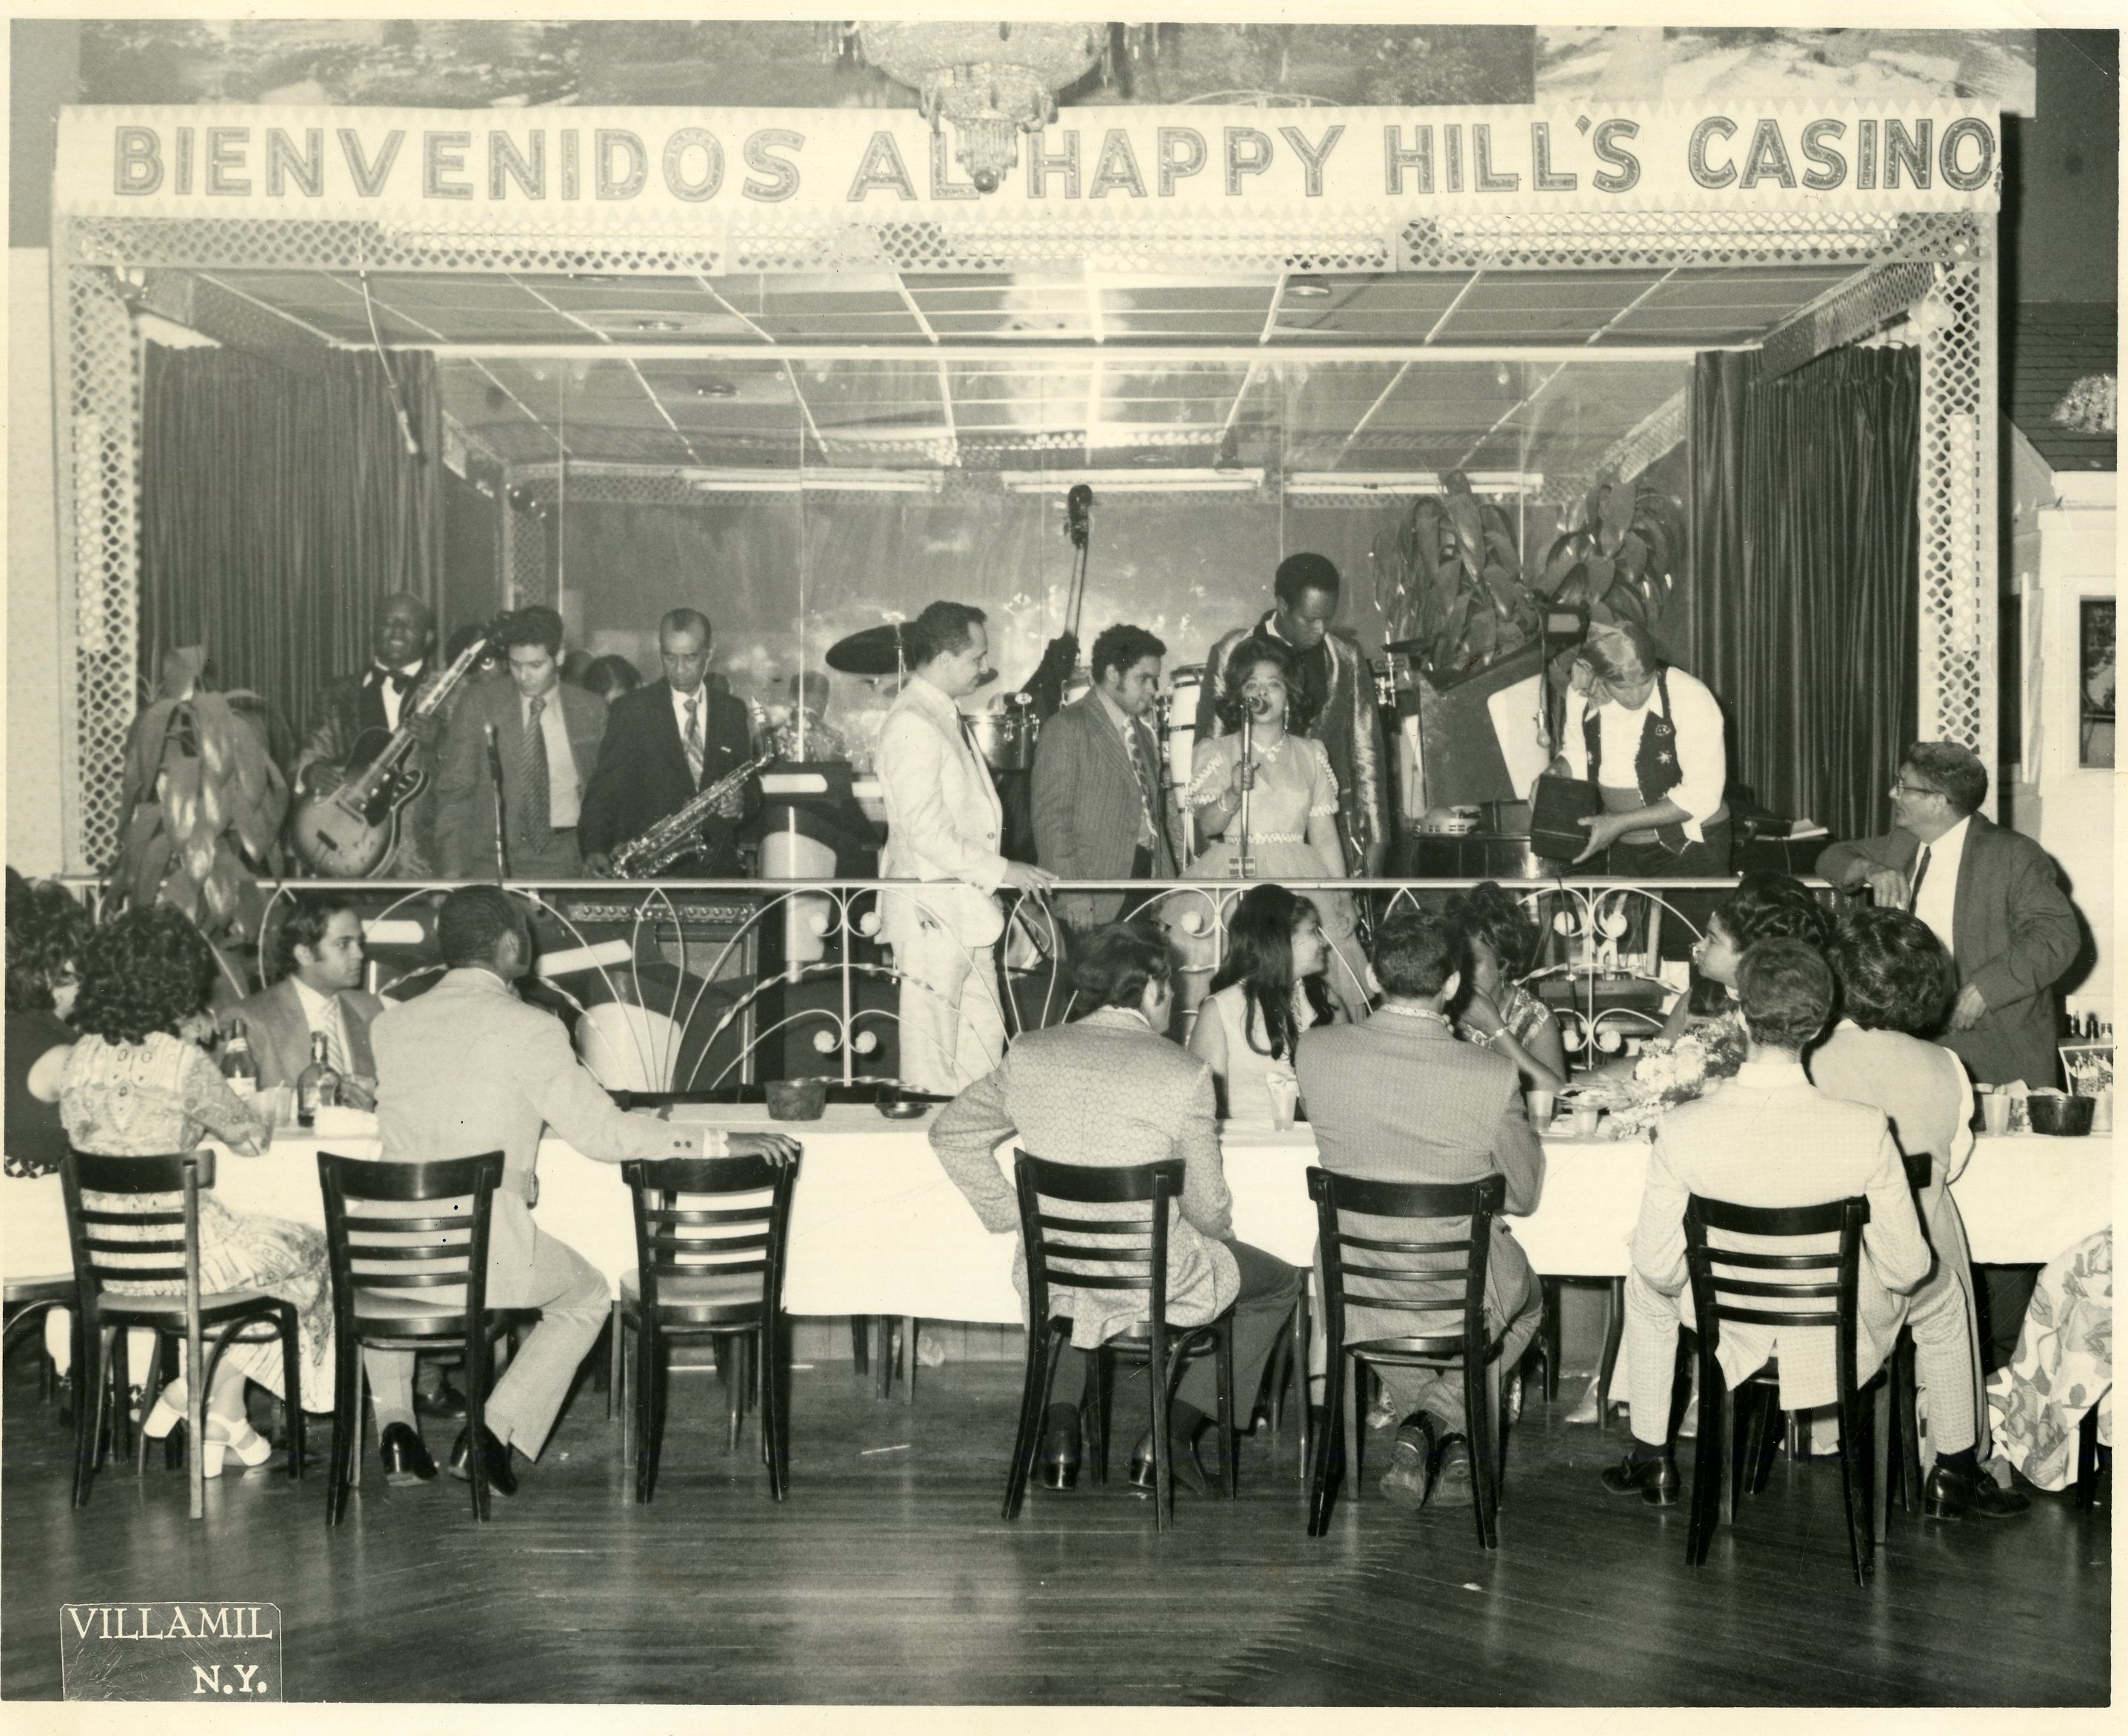 Welcome to the Happy Hills Casino, ca. 1970s